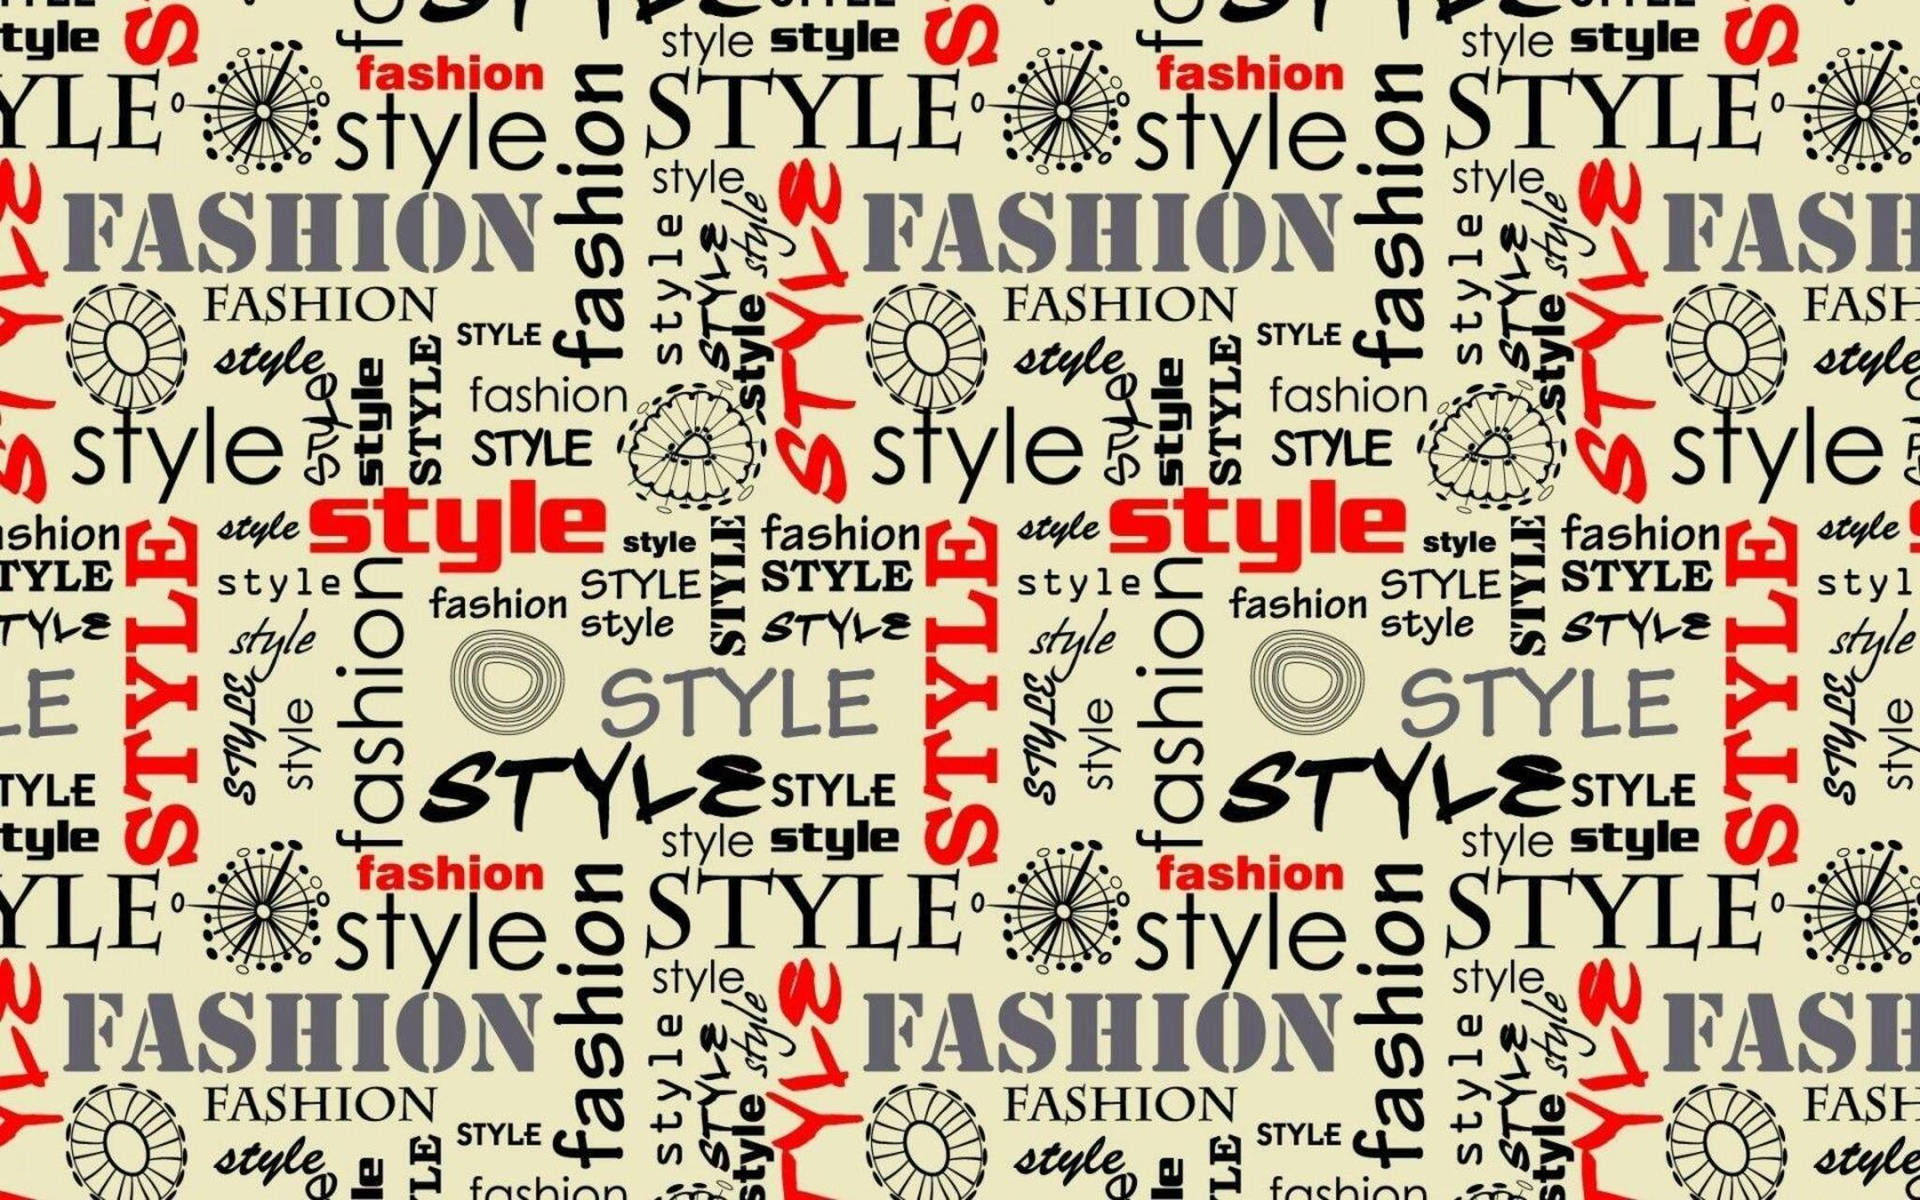 Make a Statement with your Fashion Style Wallpaper